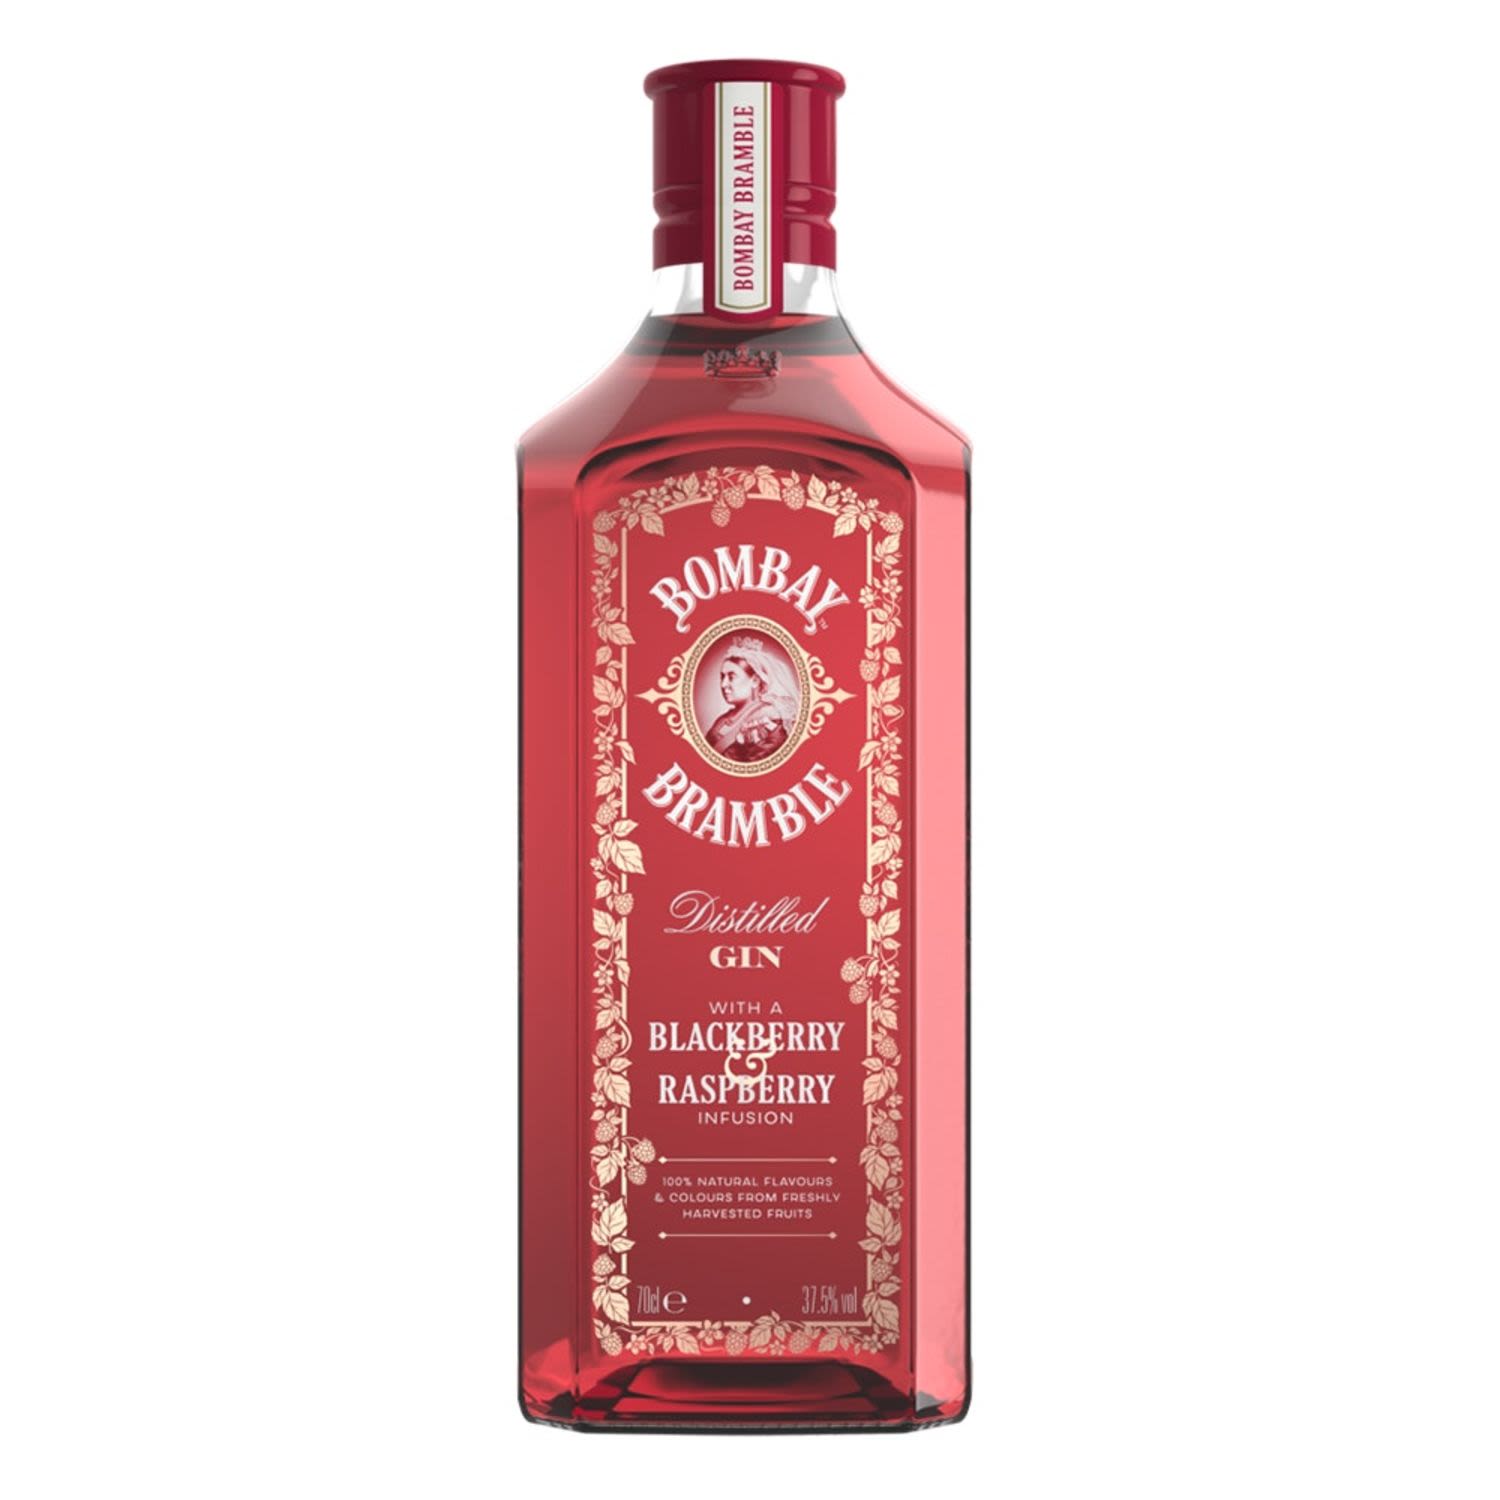 Bombay Bramble Gin is made with freshly harvested blackberries and raspberries, capturing the real flavour and essence of fresh blackberries and raspberries when they are most ripe, imparting their rich, vibrant characteristics.<br /> <br />Alcohol Volume: 37.50%<br /><br />Pack Format: Bottle<br /><br />Standard Drinks: 22.2</br /><br />Pack Type: Bottle<br /><br />Country of Origin: England<br />